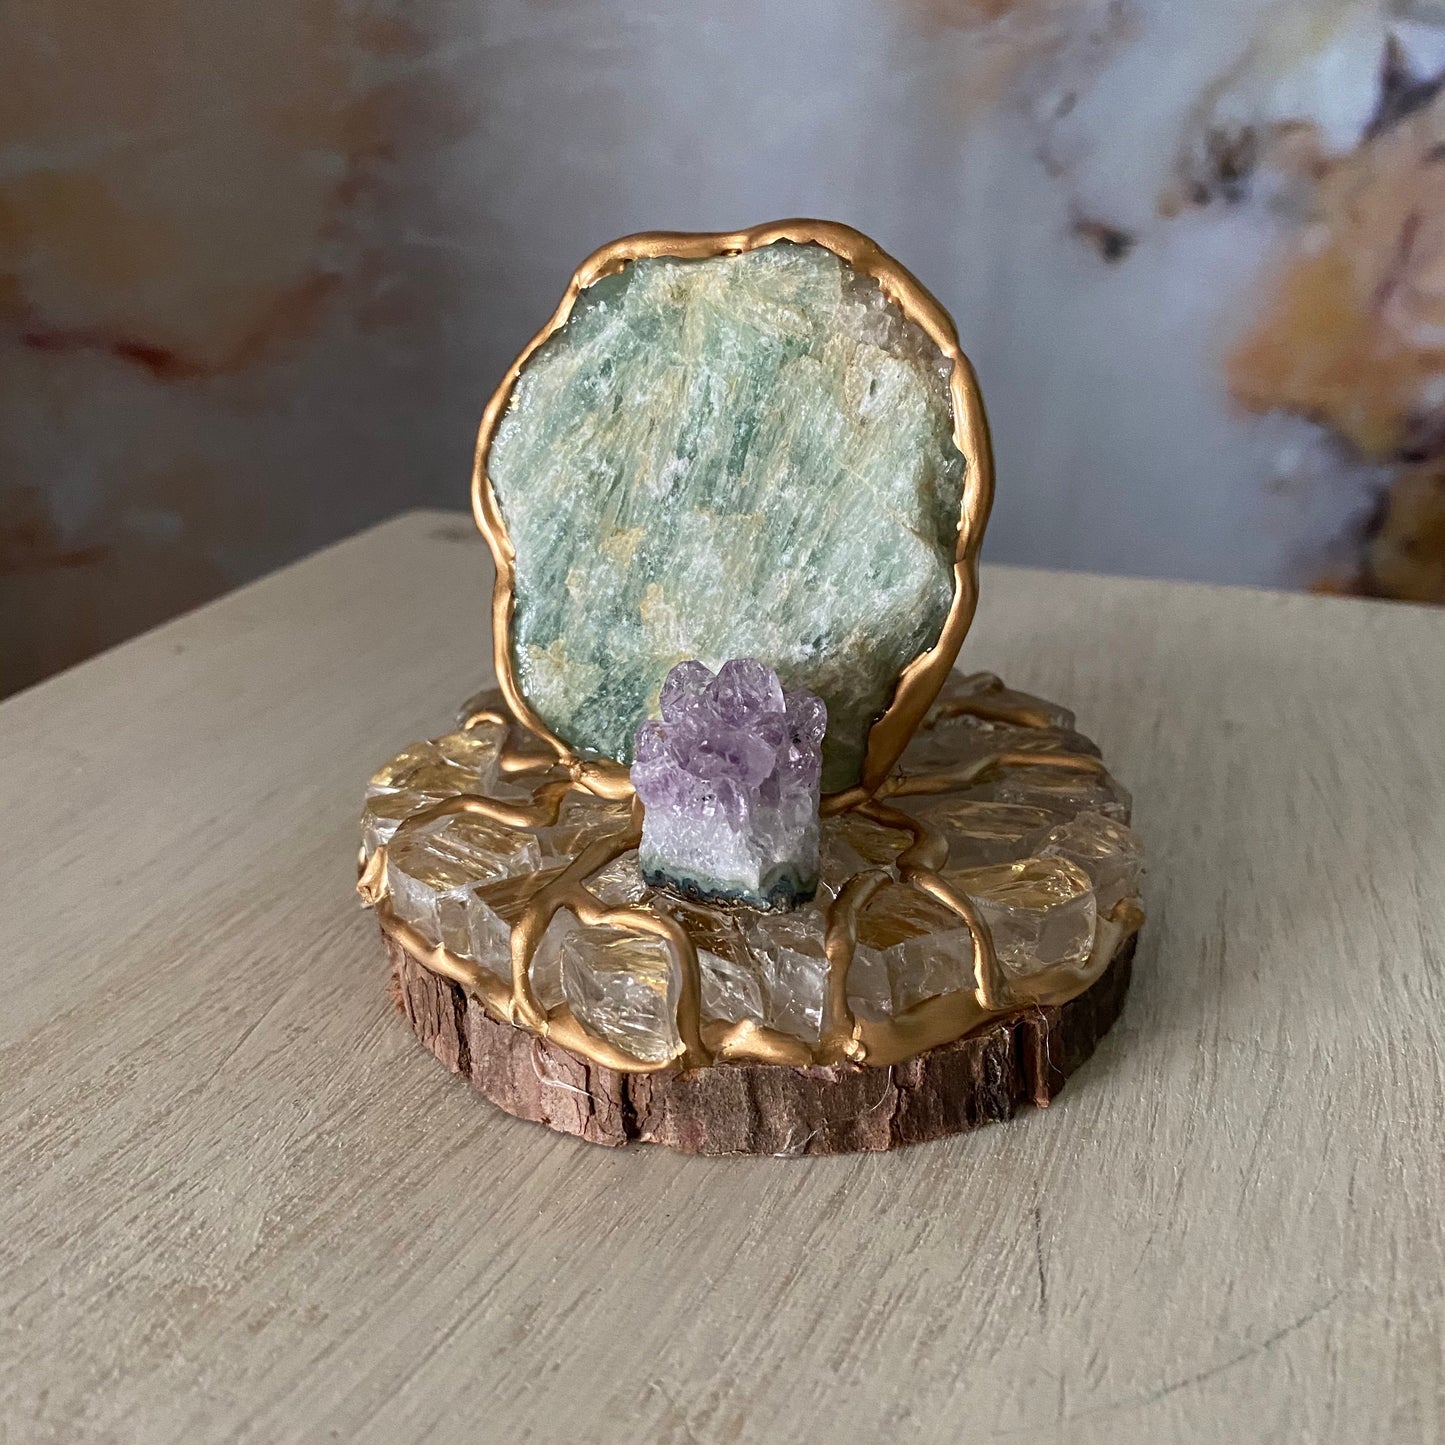 Clarity /Amazonite / Amethyst / Home Decor / Gift of Good Intention